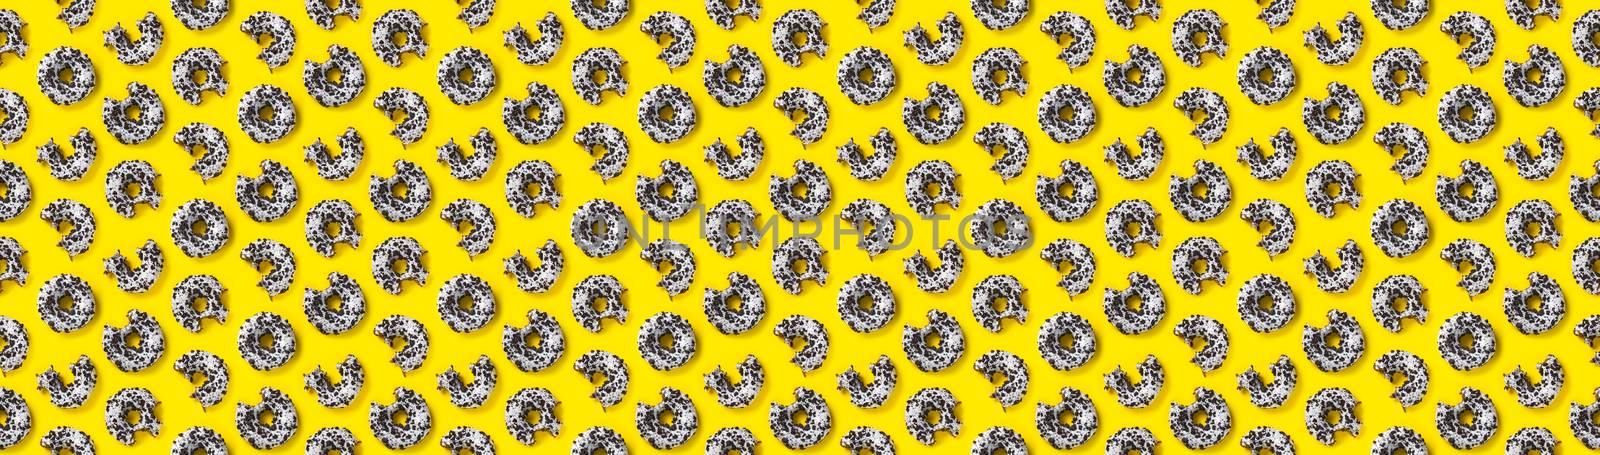 banner donuts on a yellow background top view. Flat lay of delicious nibbled chocolate donuts. used as donut banner or poster background, not pattern. by PhotoTime